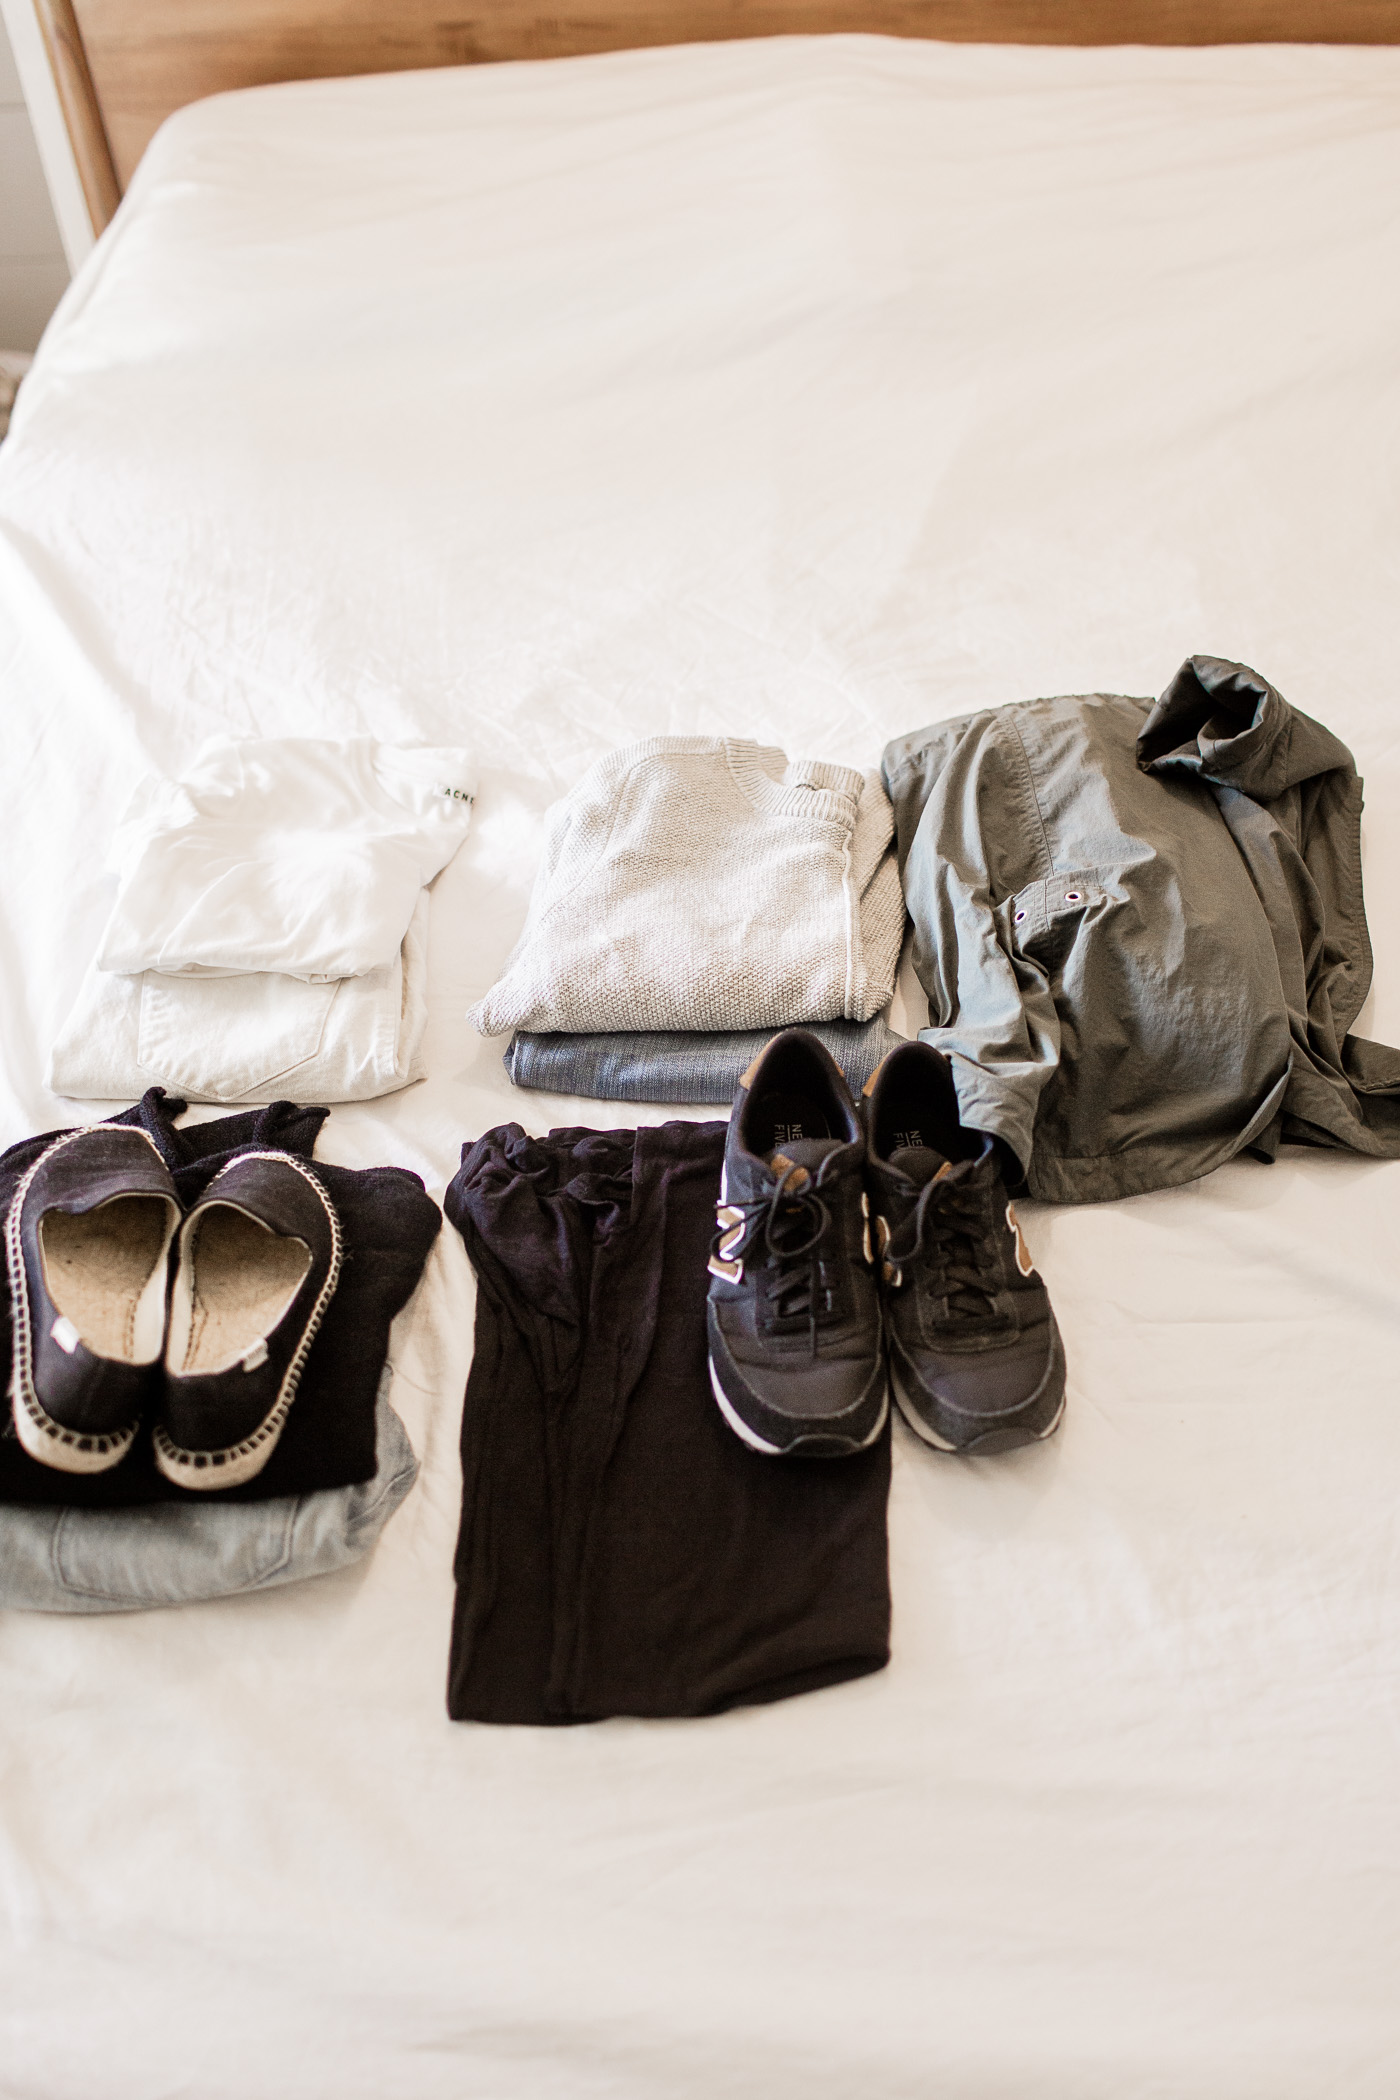 Packing for Sea Ranch, what I packed for a getaway on California's north coast.